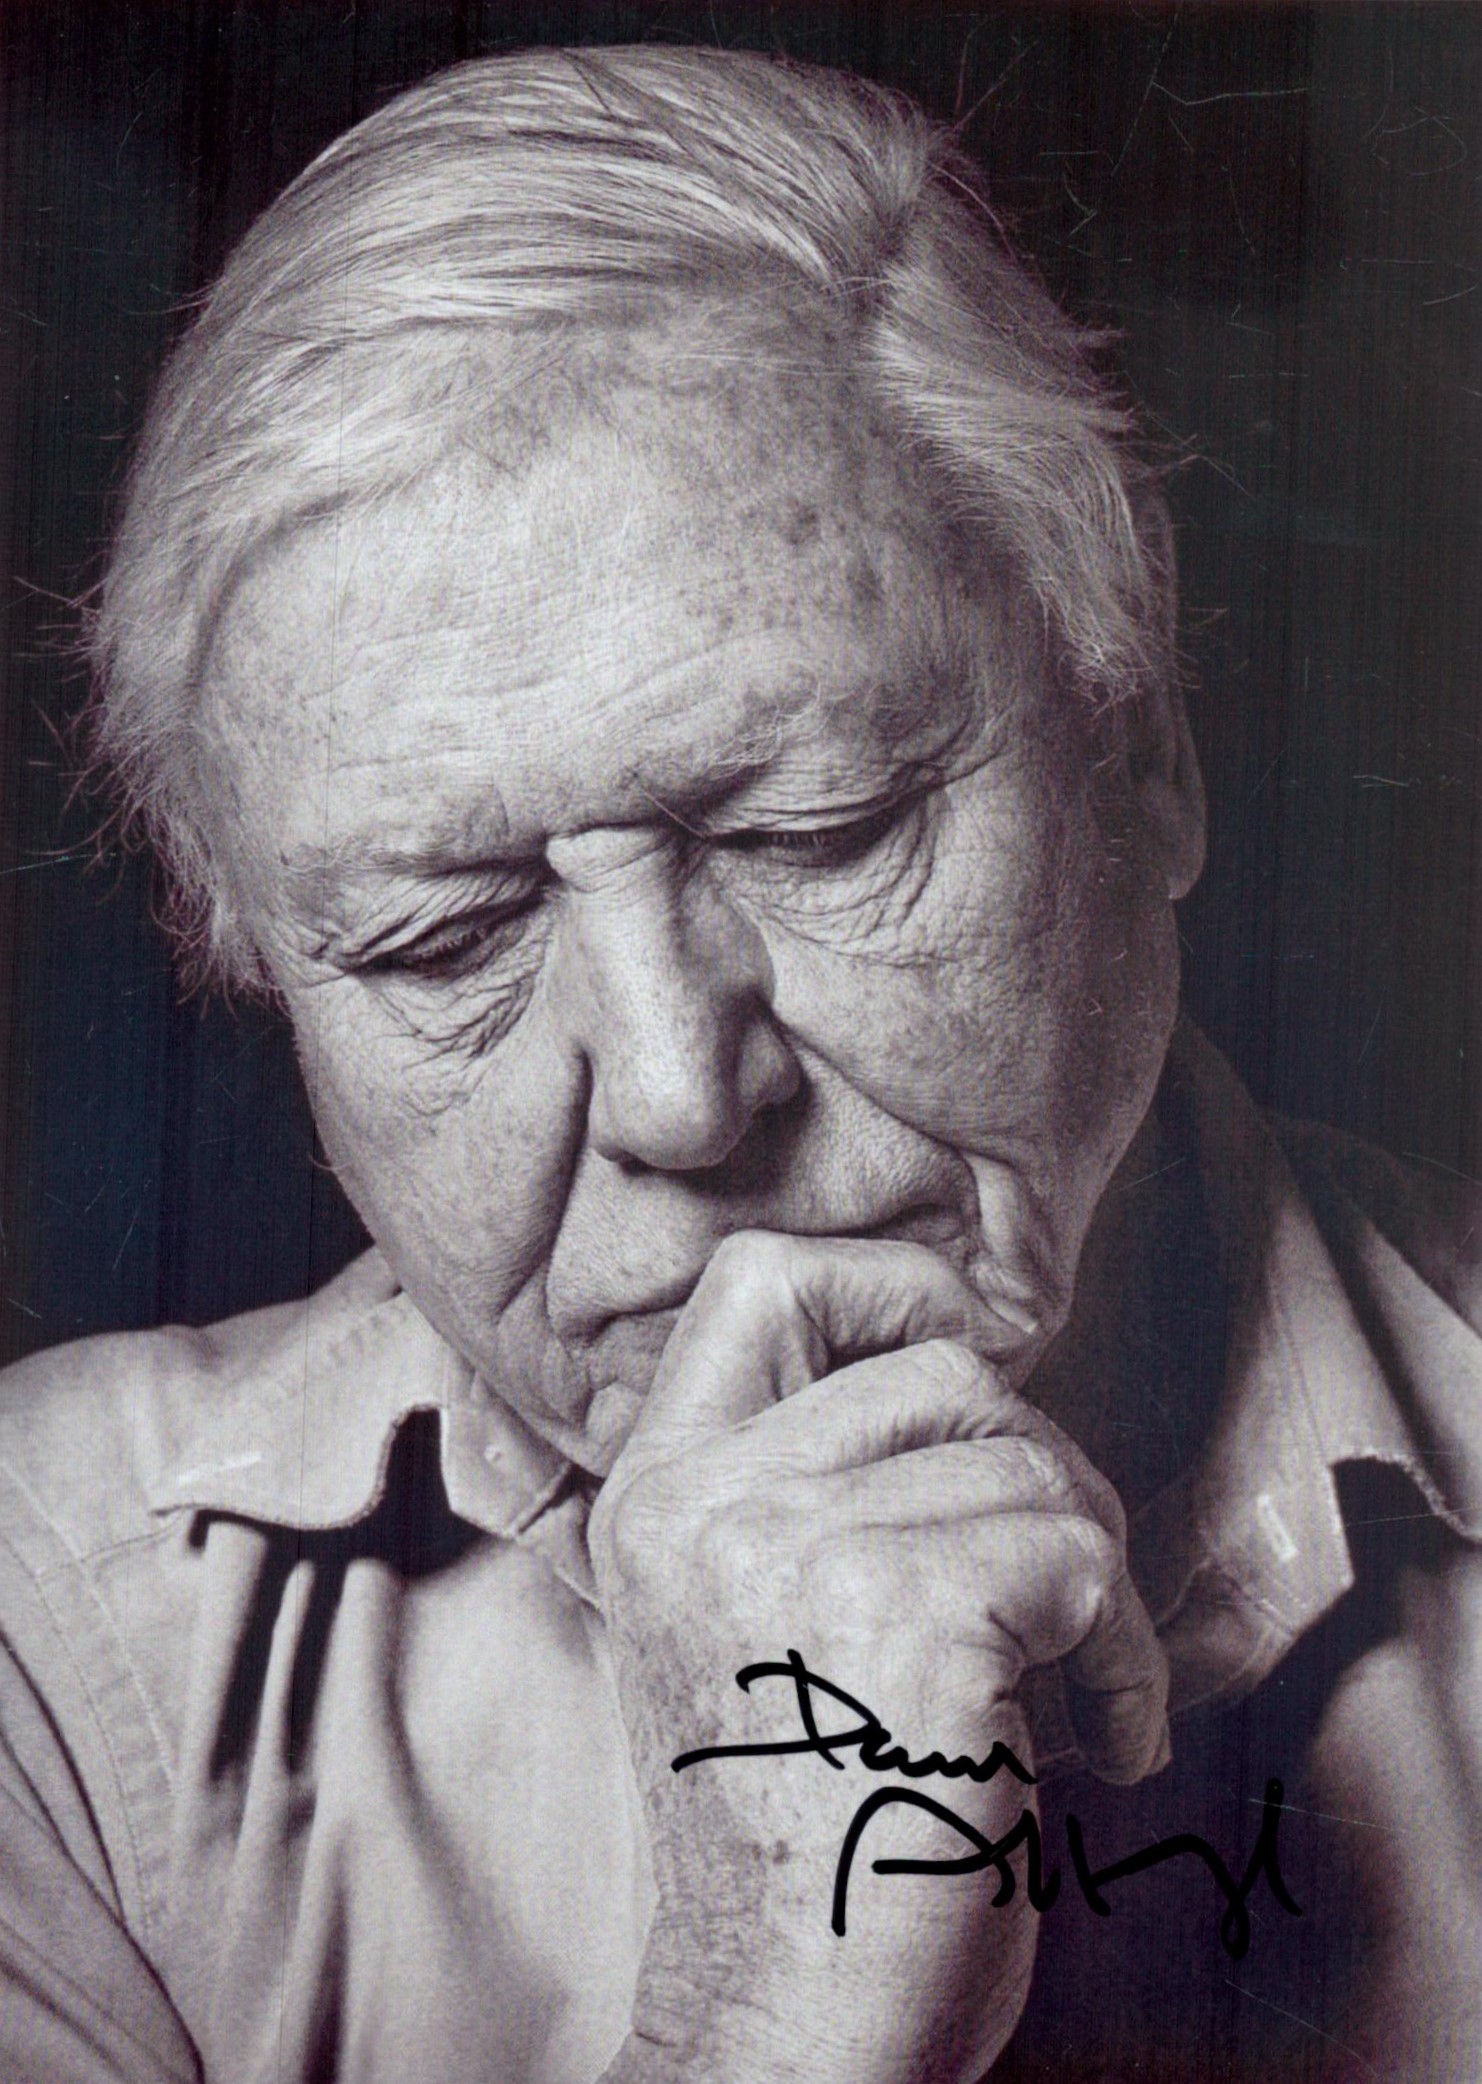 David Attenborough signed 7x5 inch black and white photo. Good Condition. All autographs come with a